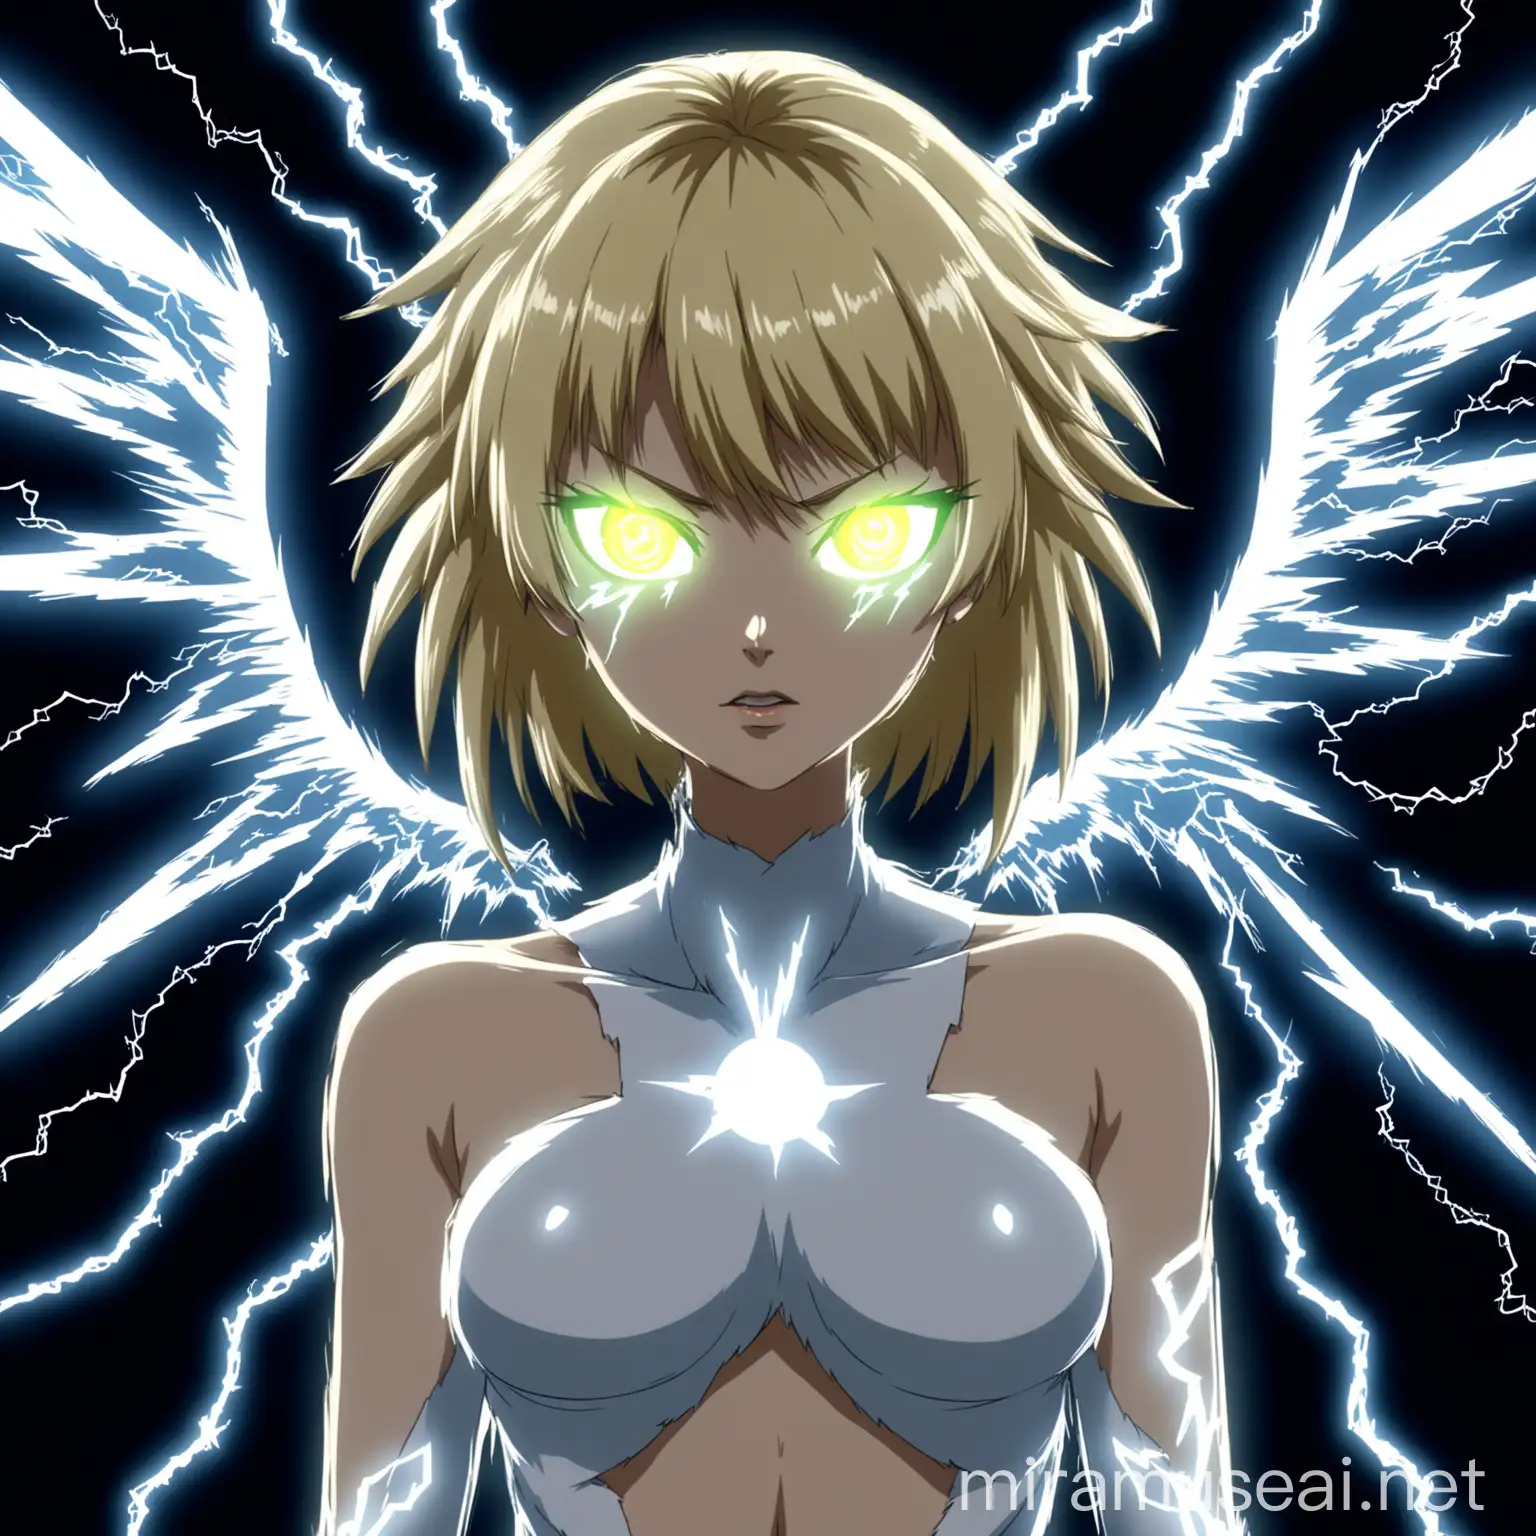 an angelic woman, she has lightning wings, she has a wolfcut blonde hair, she has a beautiful body, her skin is full of lightning bolts, she has luminous electric luminous eyes, she has a crazy look, in anime